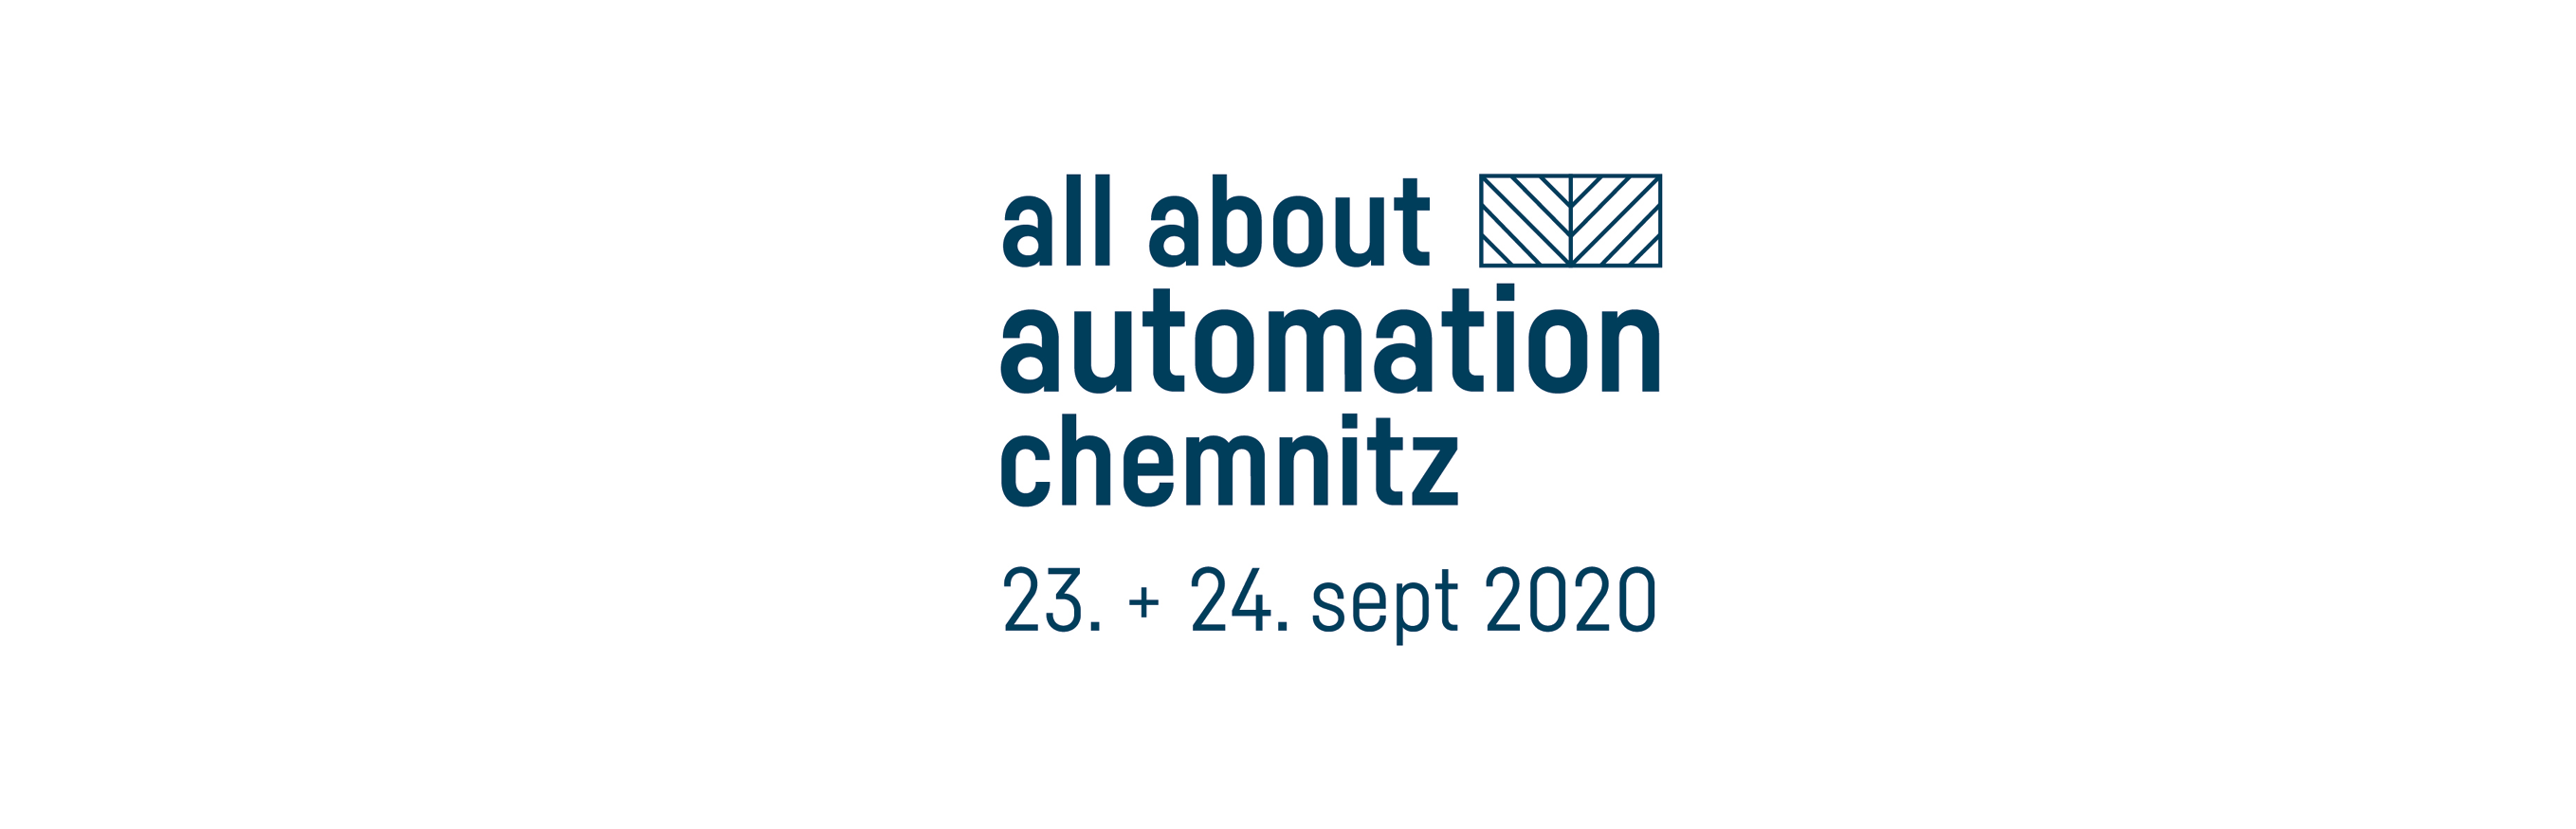 All about automation Chemnitz